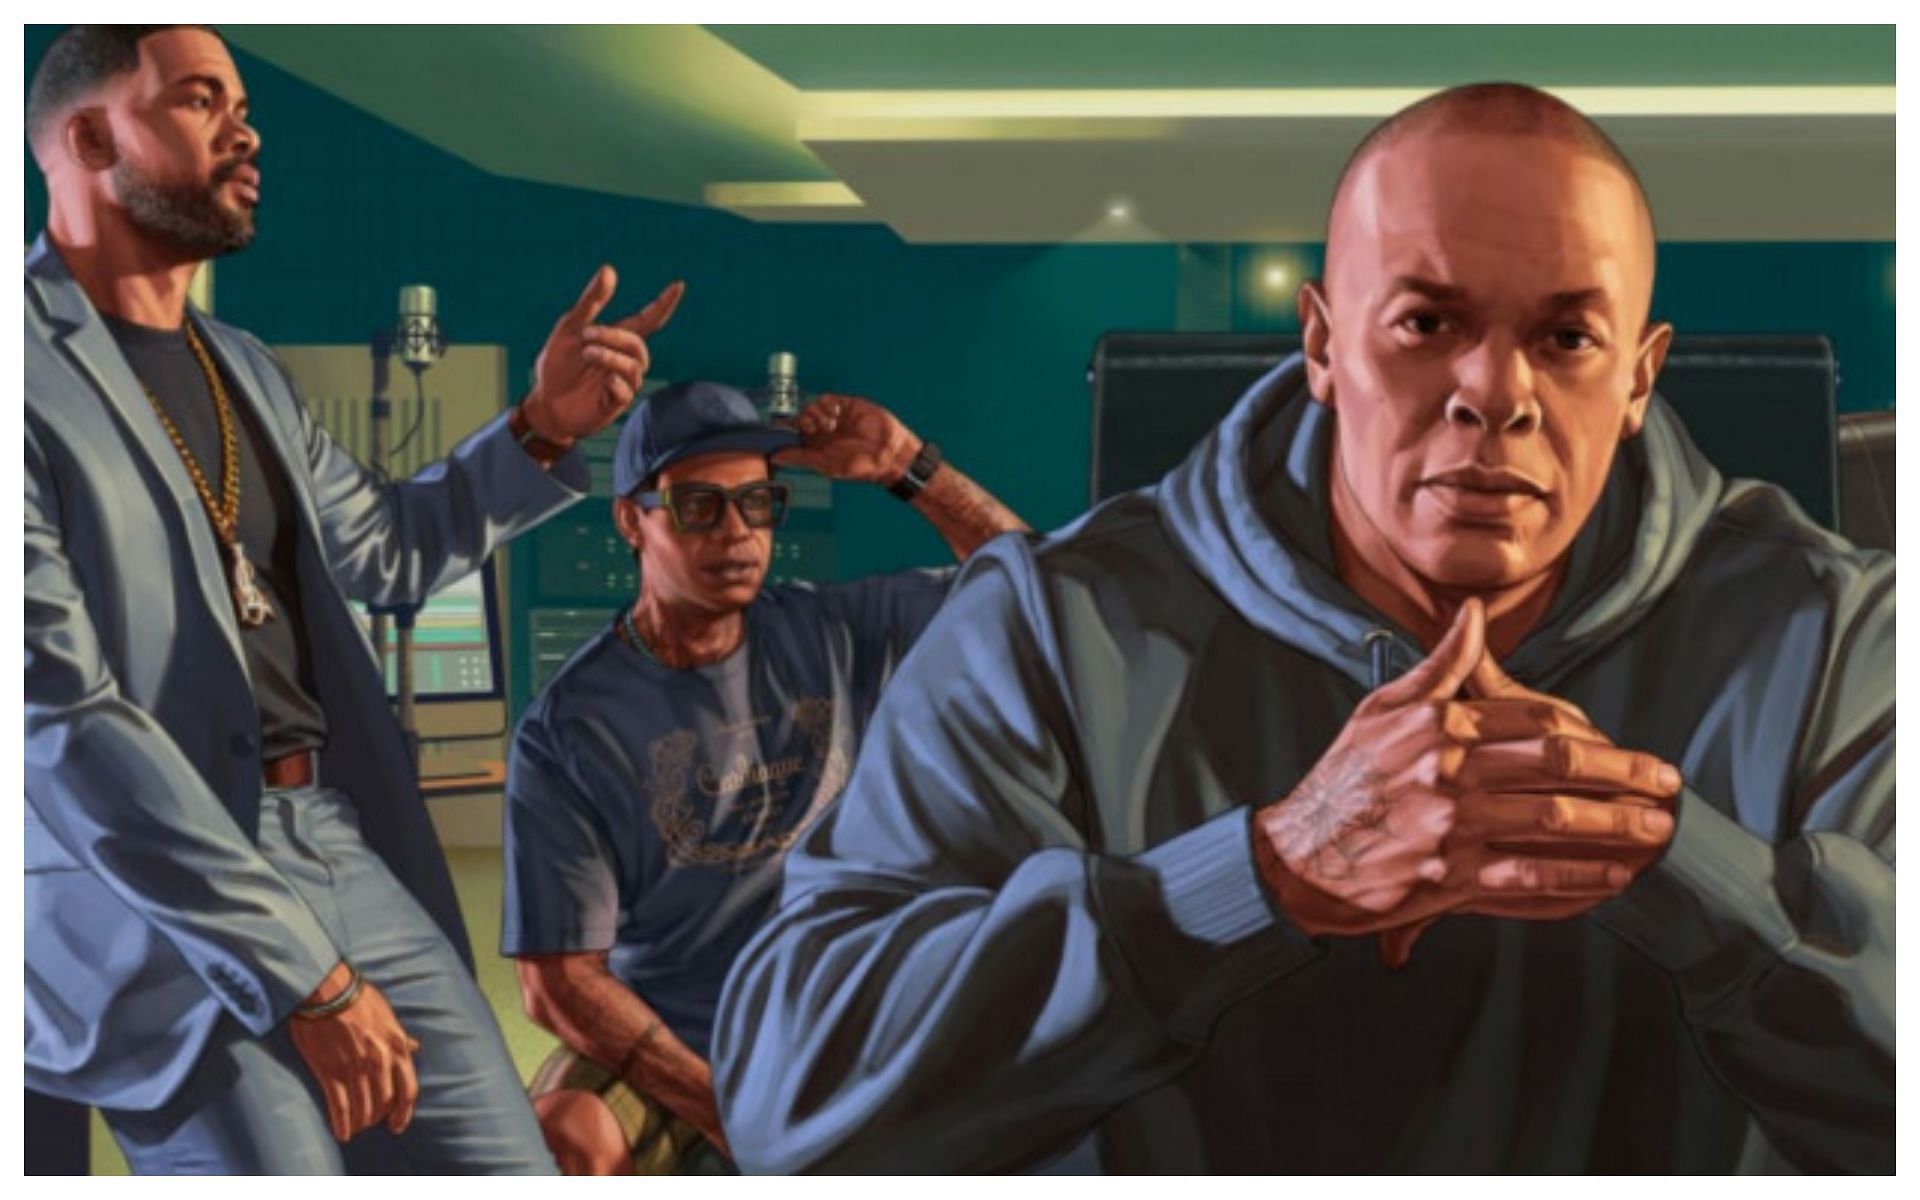 Dre and the crew discussing the business (Image via Rockstar Games)